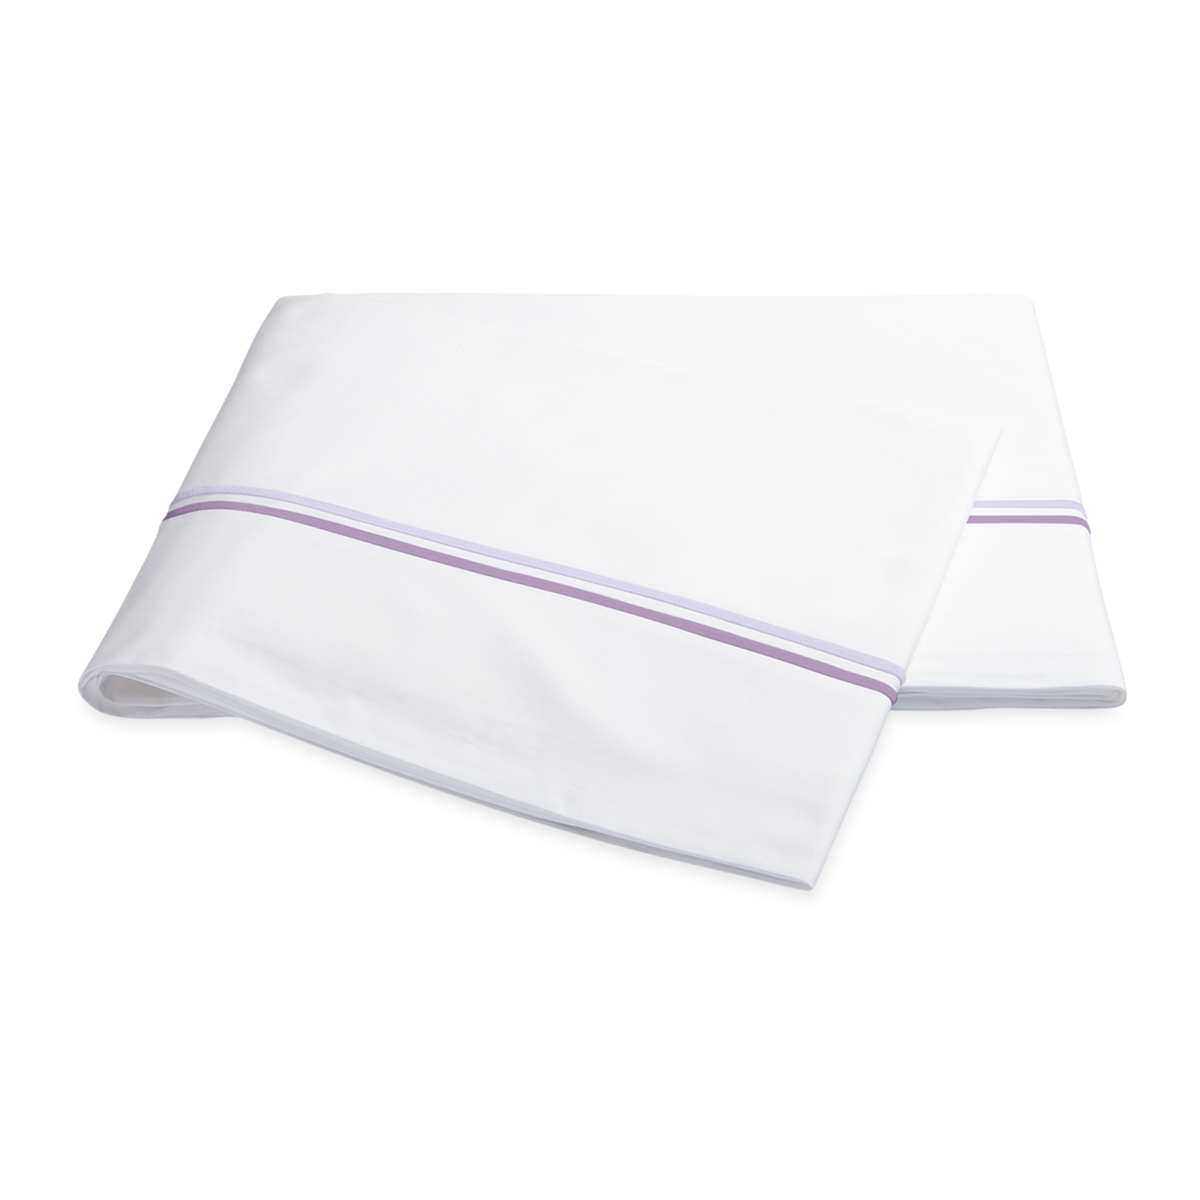 Flat Sheet of Matouk Essex Bedding Collection in Lilac Color